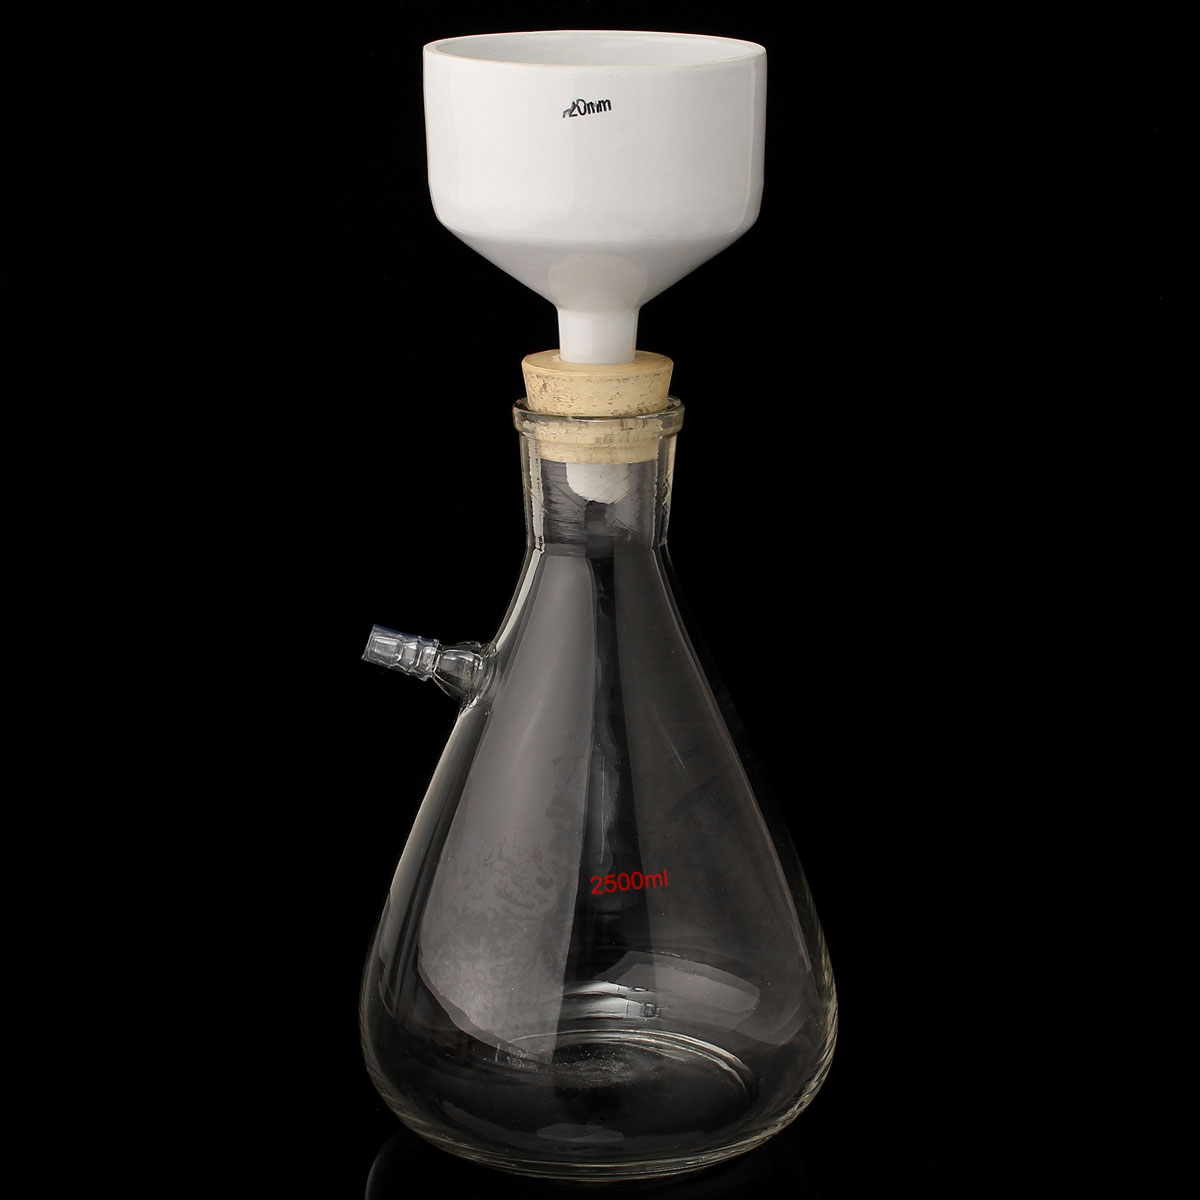 2500mL-Filteration-Buchner-Funnel-Kit-Vacuum-Suction-Glass-Flask-Apparatus-1051468-2